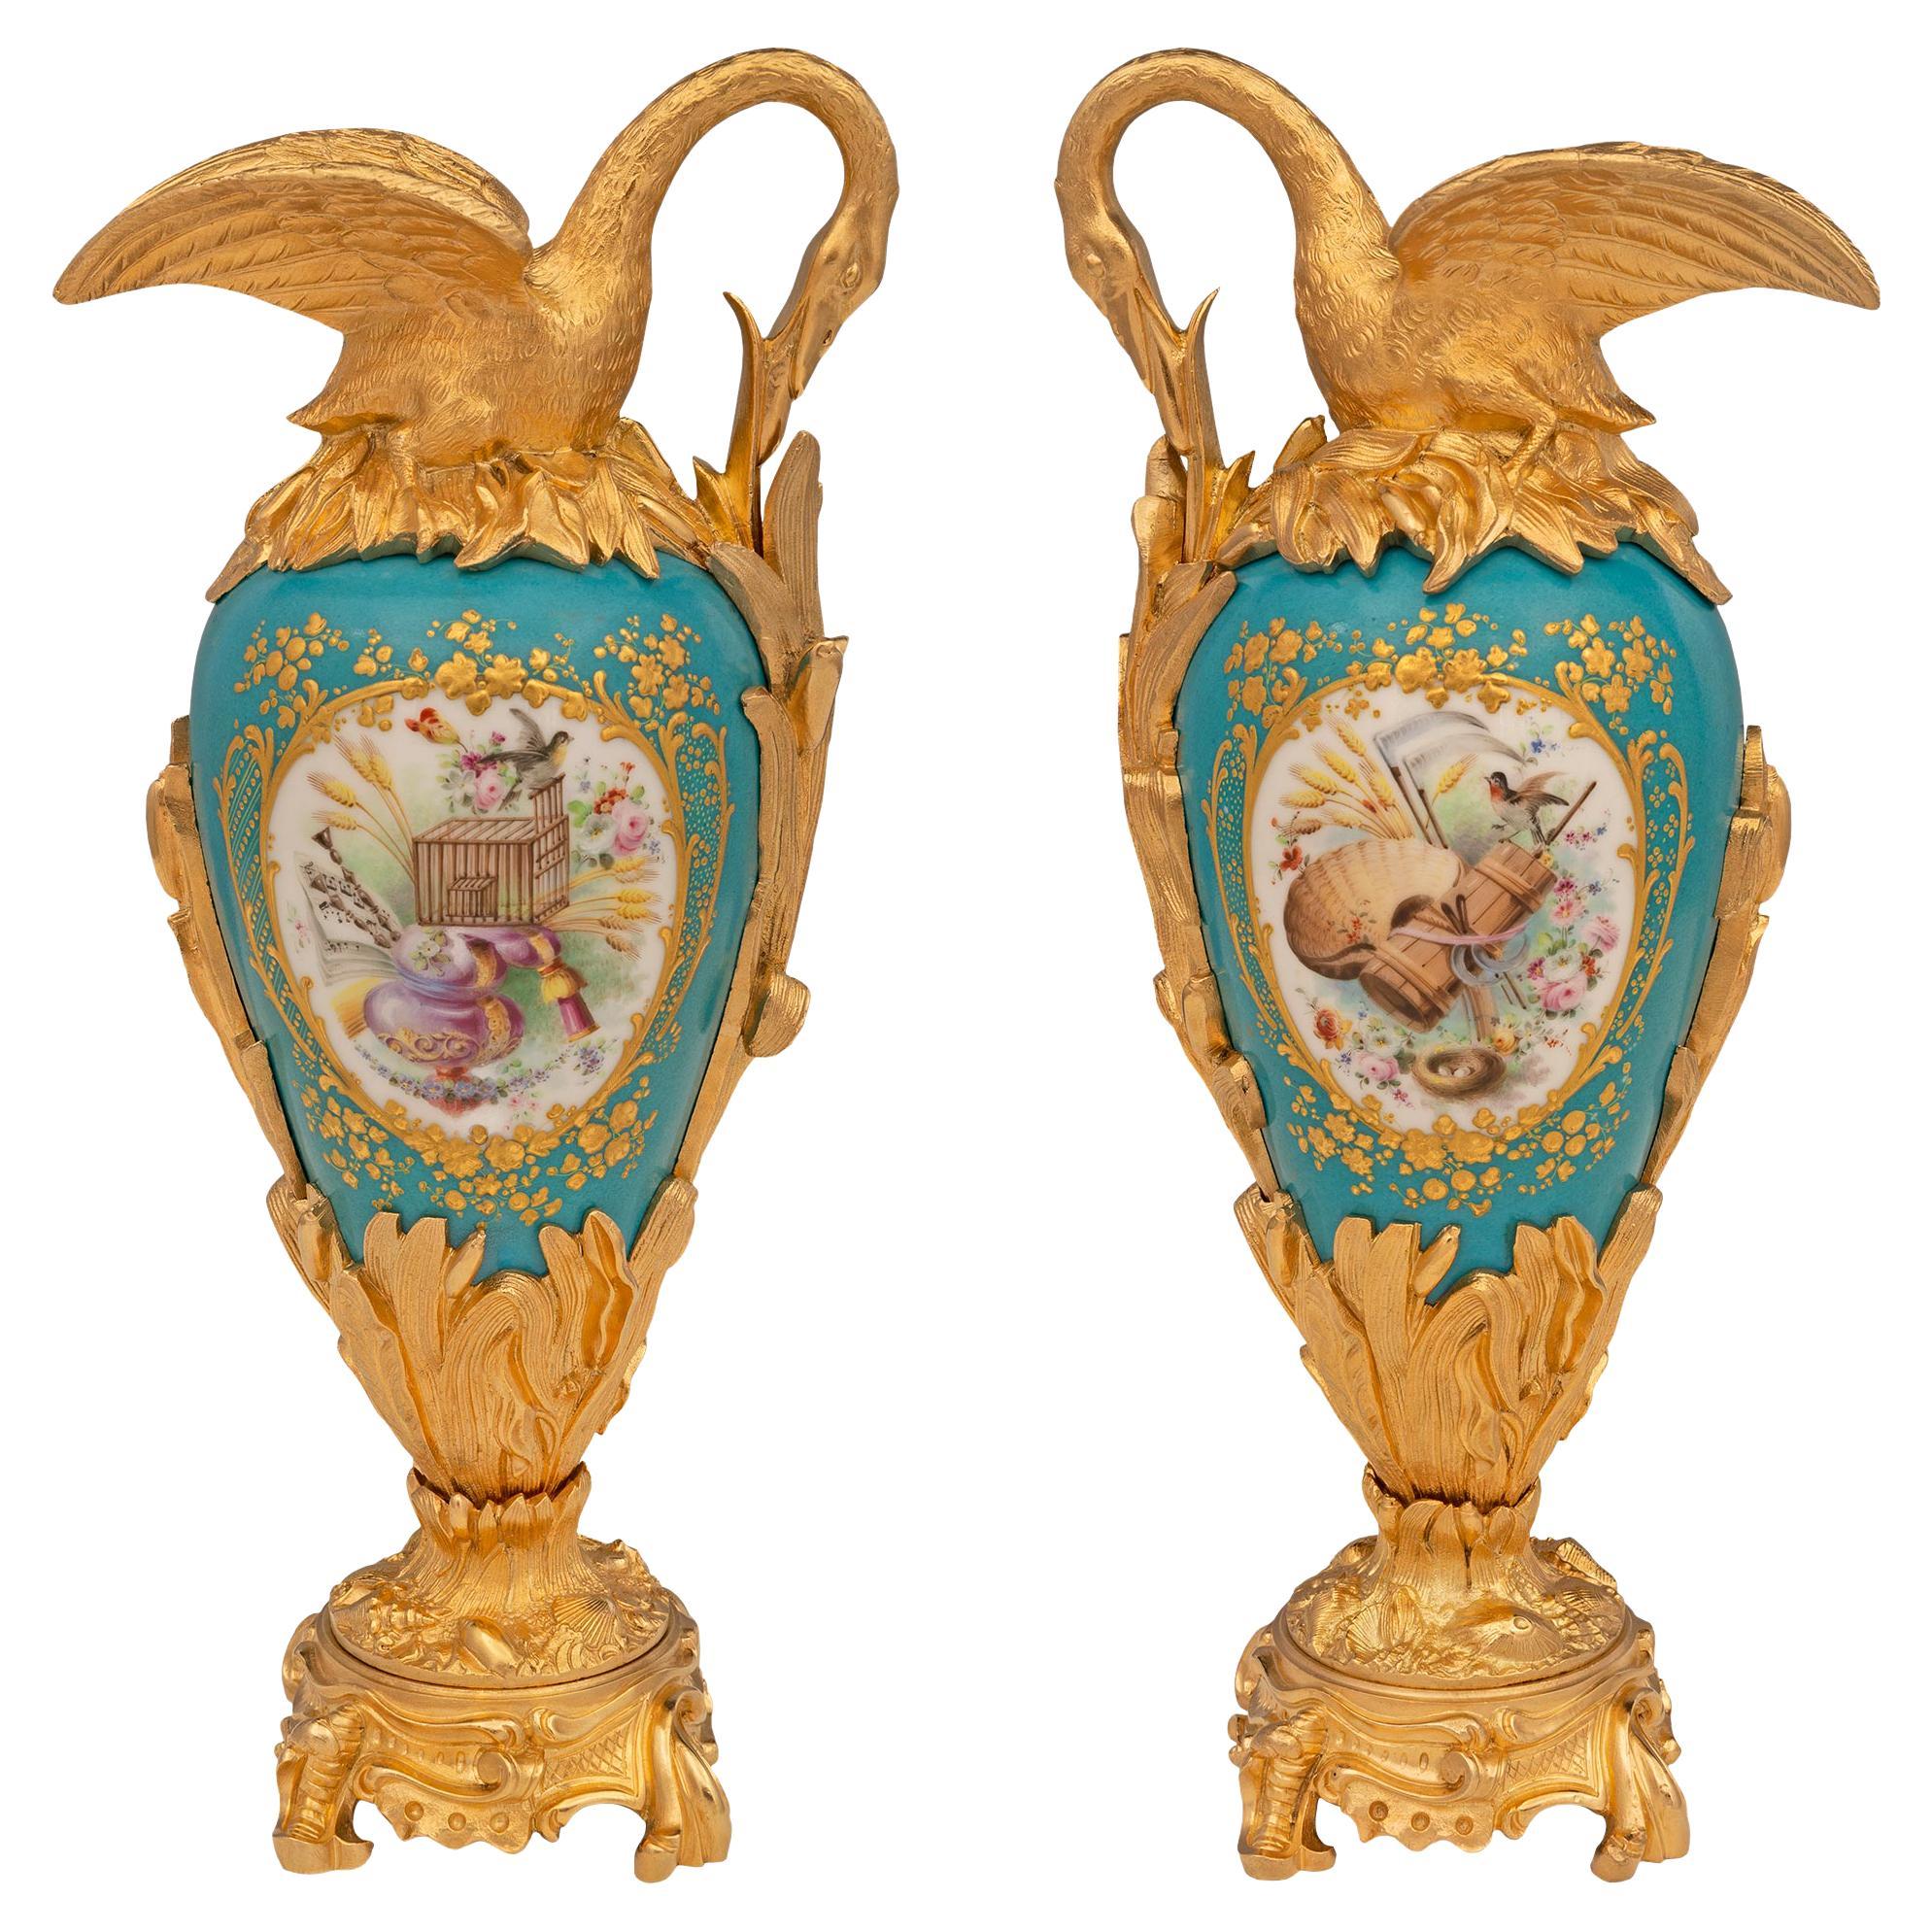 Pair of French 19th Century Louis XVI St. Sèvres Porcelain and Ormolu Ewers For Sale